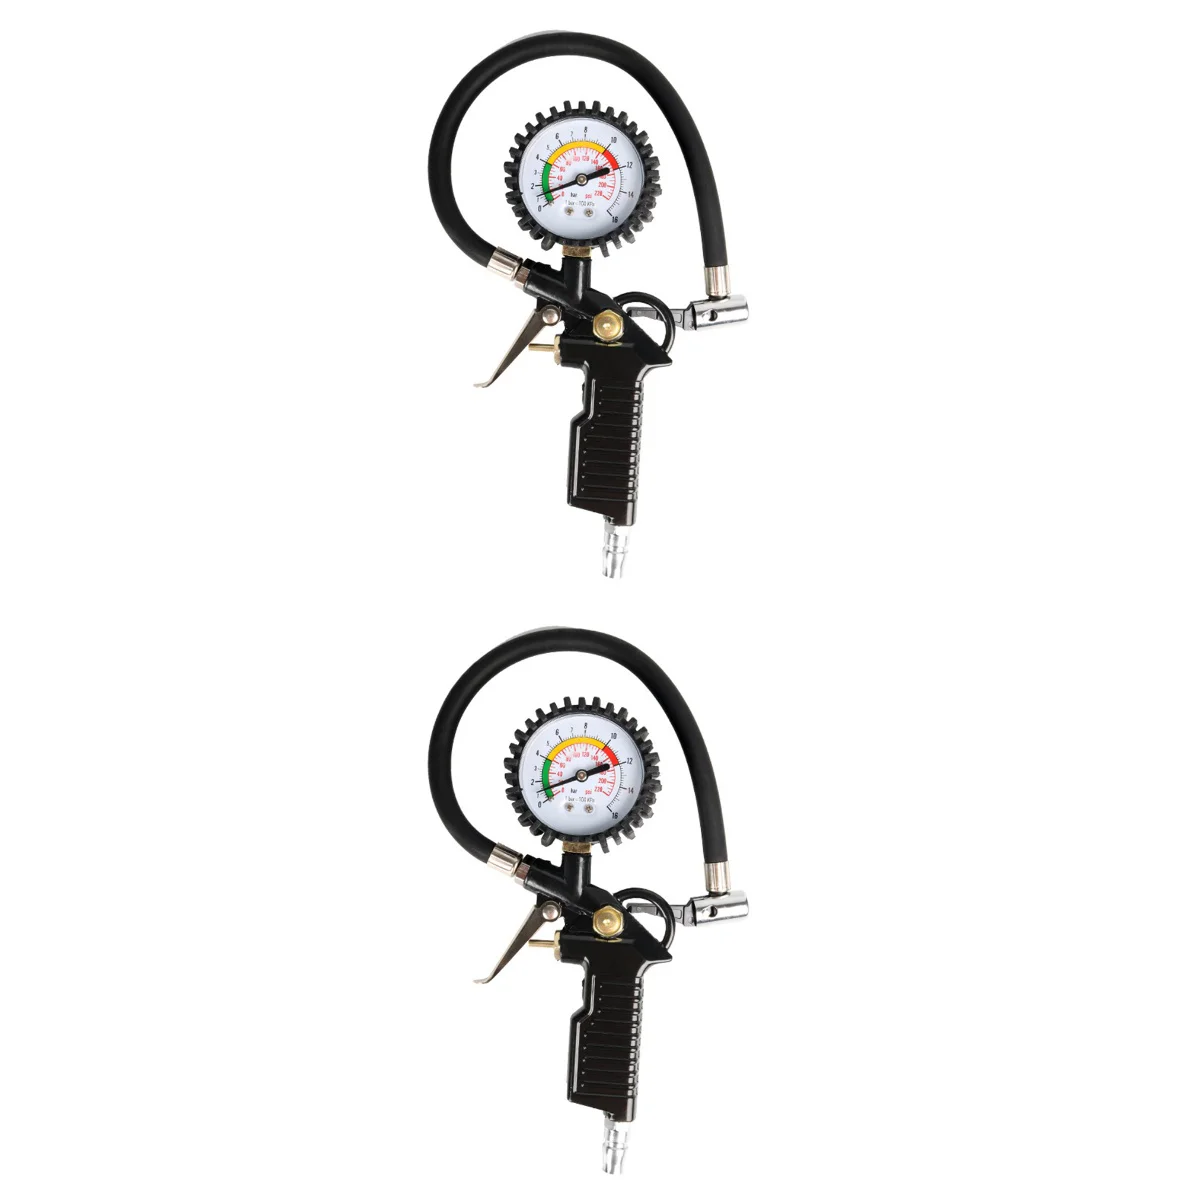 

2pcs Max 220 Psi Mechanical Tire Pressure Gauge With Rubber Tube For Automobile Tire